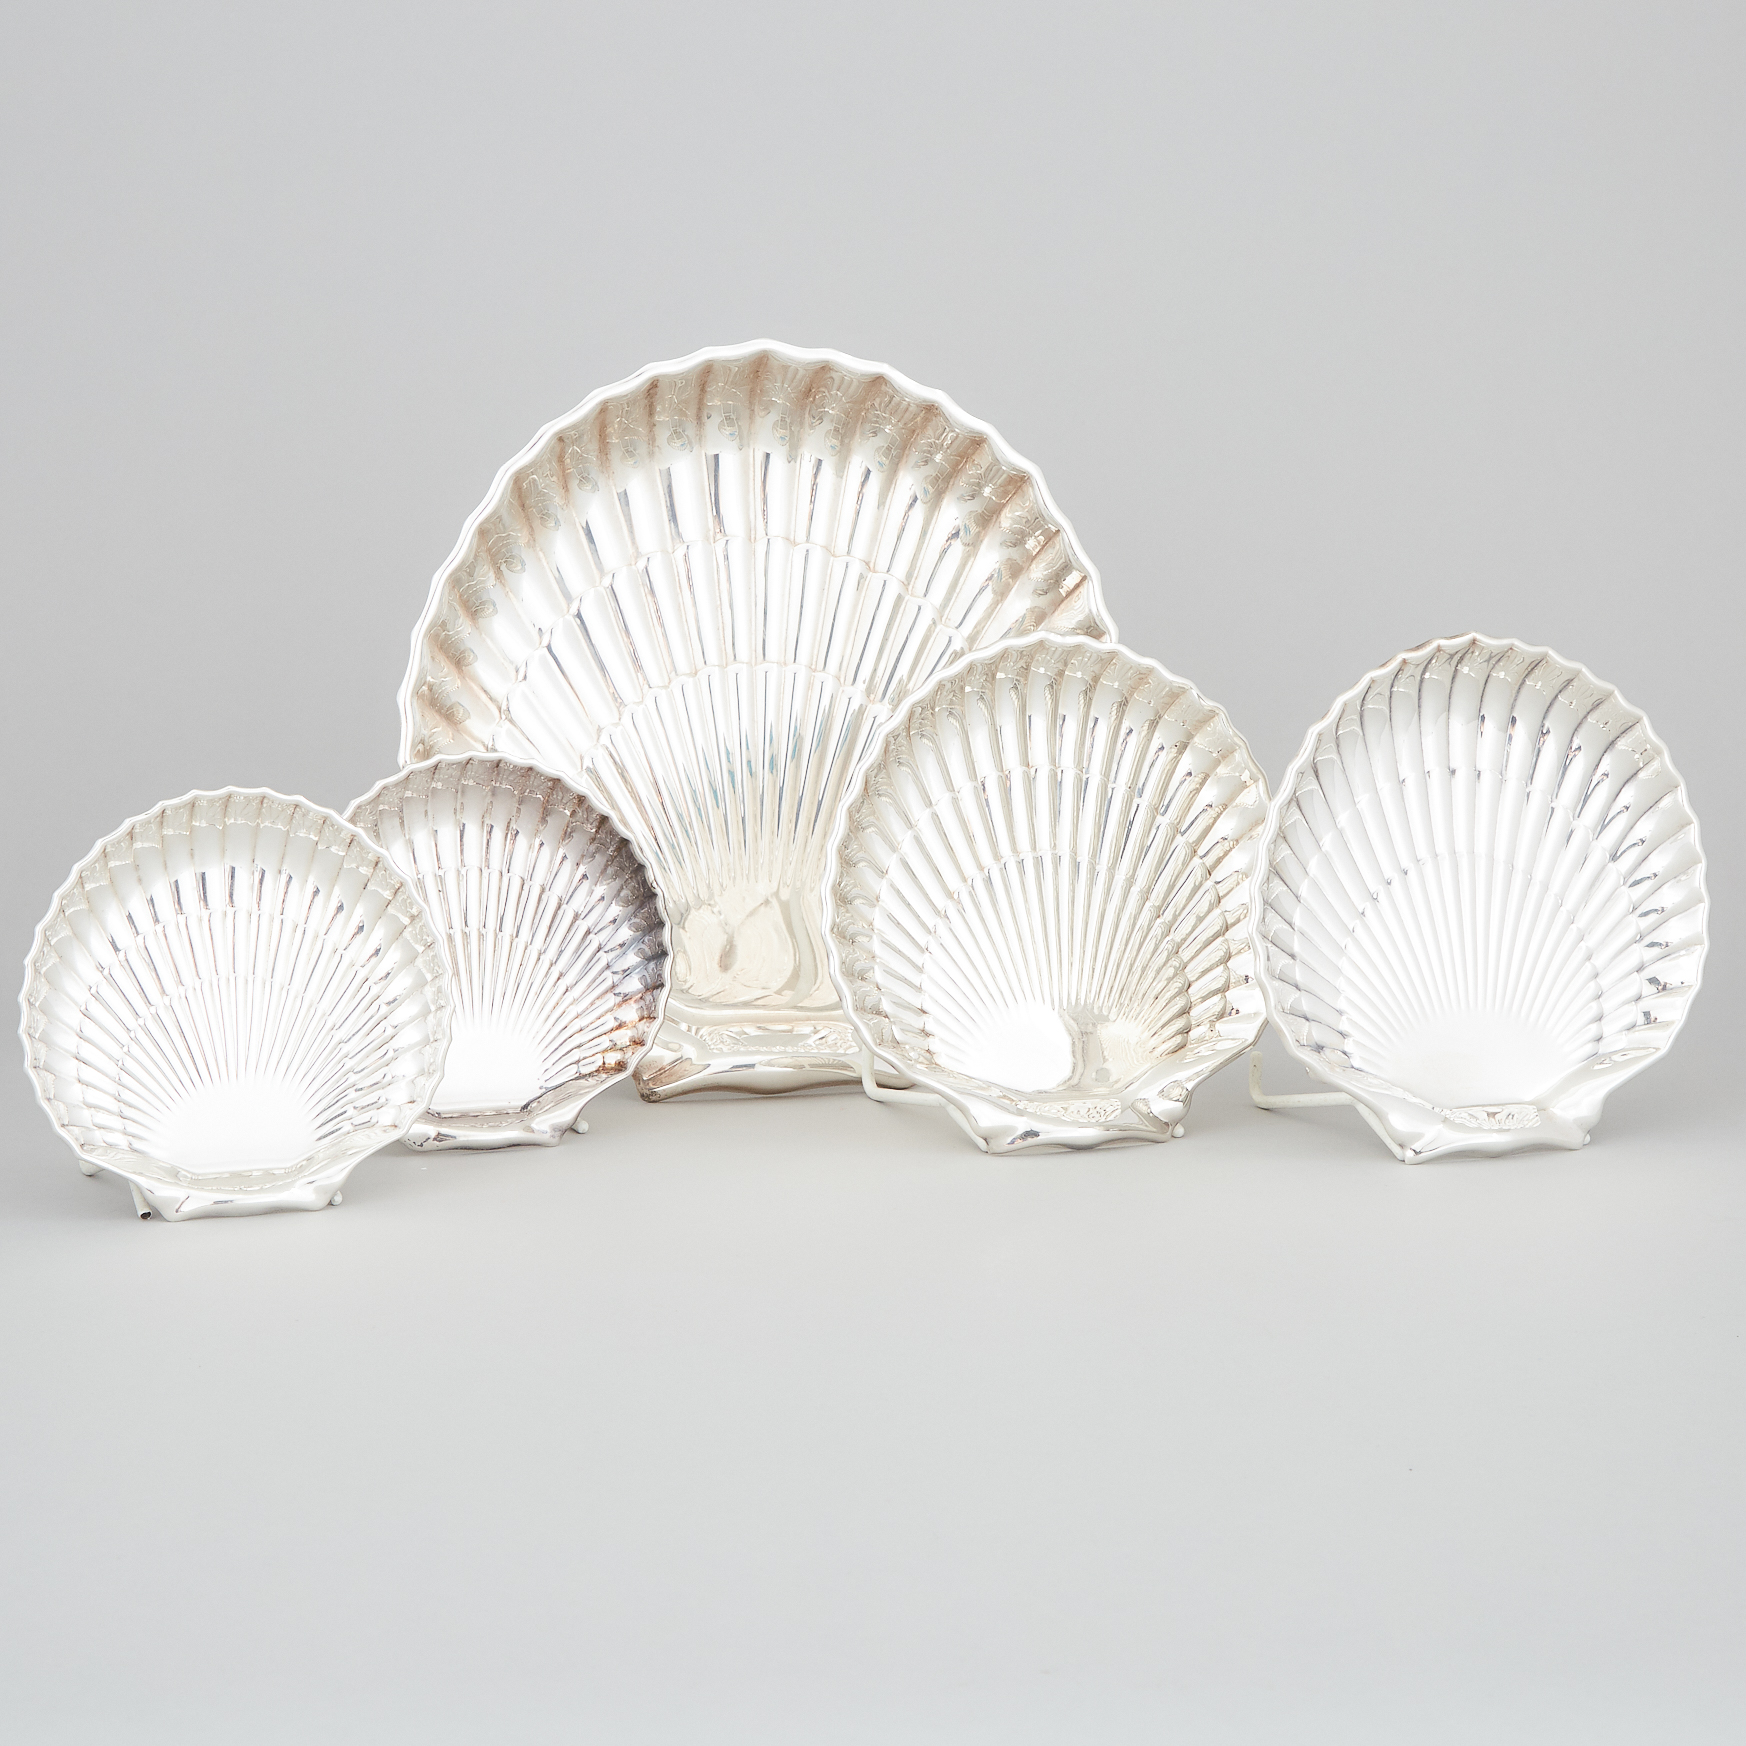 Five Canadian Silver Shell Shaped Dishes, Henry Birks & Sons, Montreal, Que., 1945-65